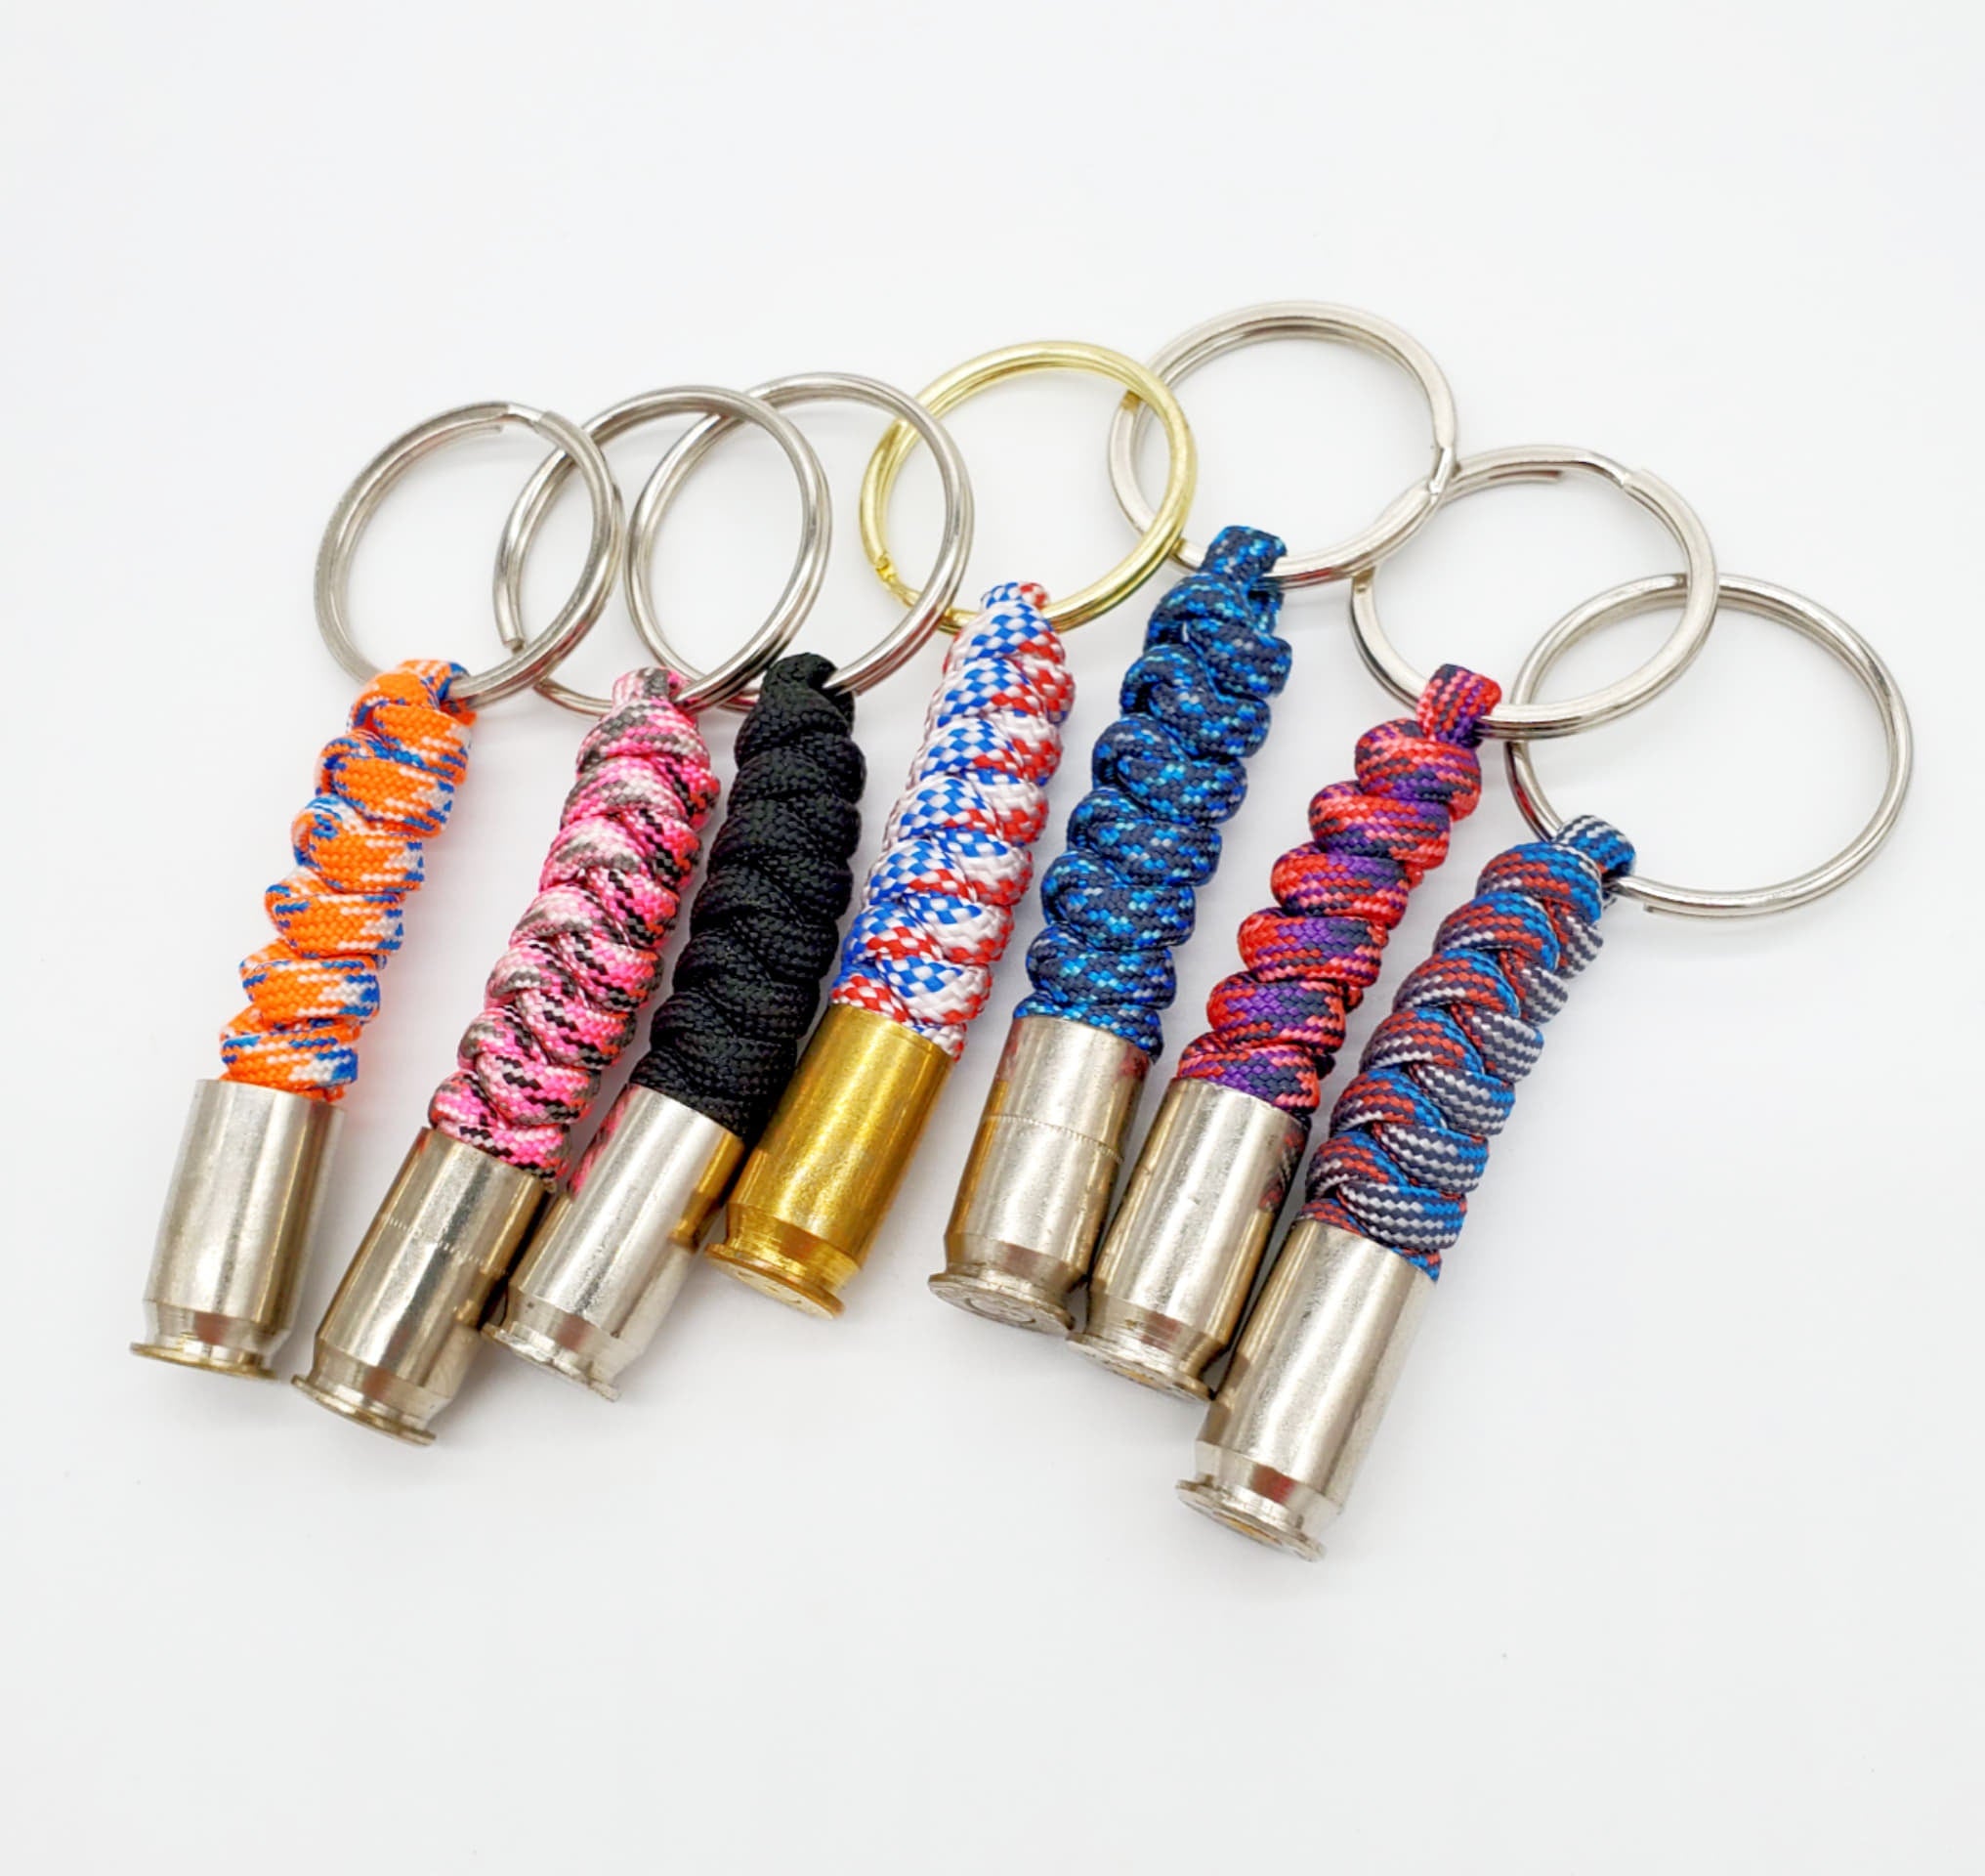 Paracord/.45 Spent Brass Keychain, Red/Blue/Silver